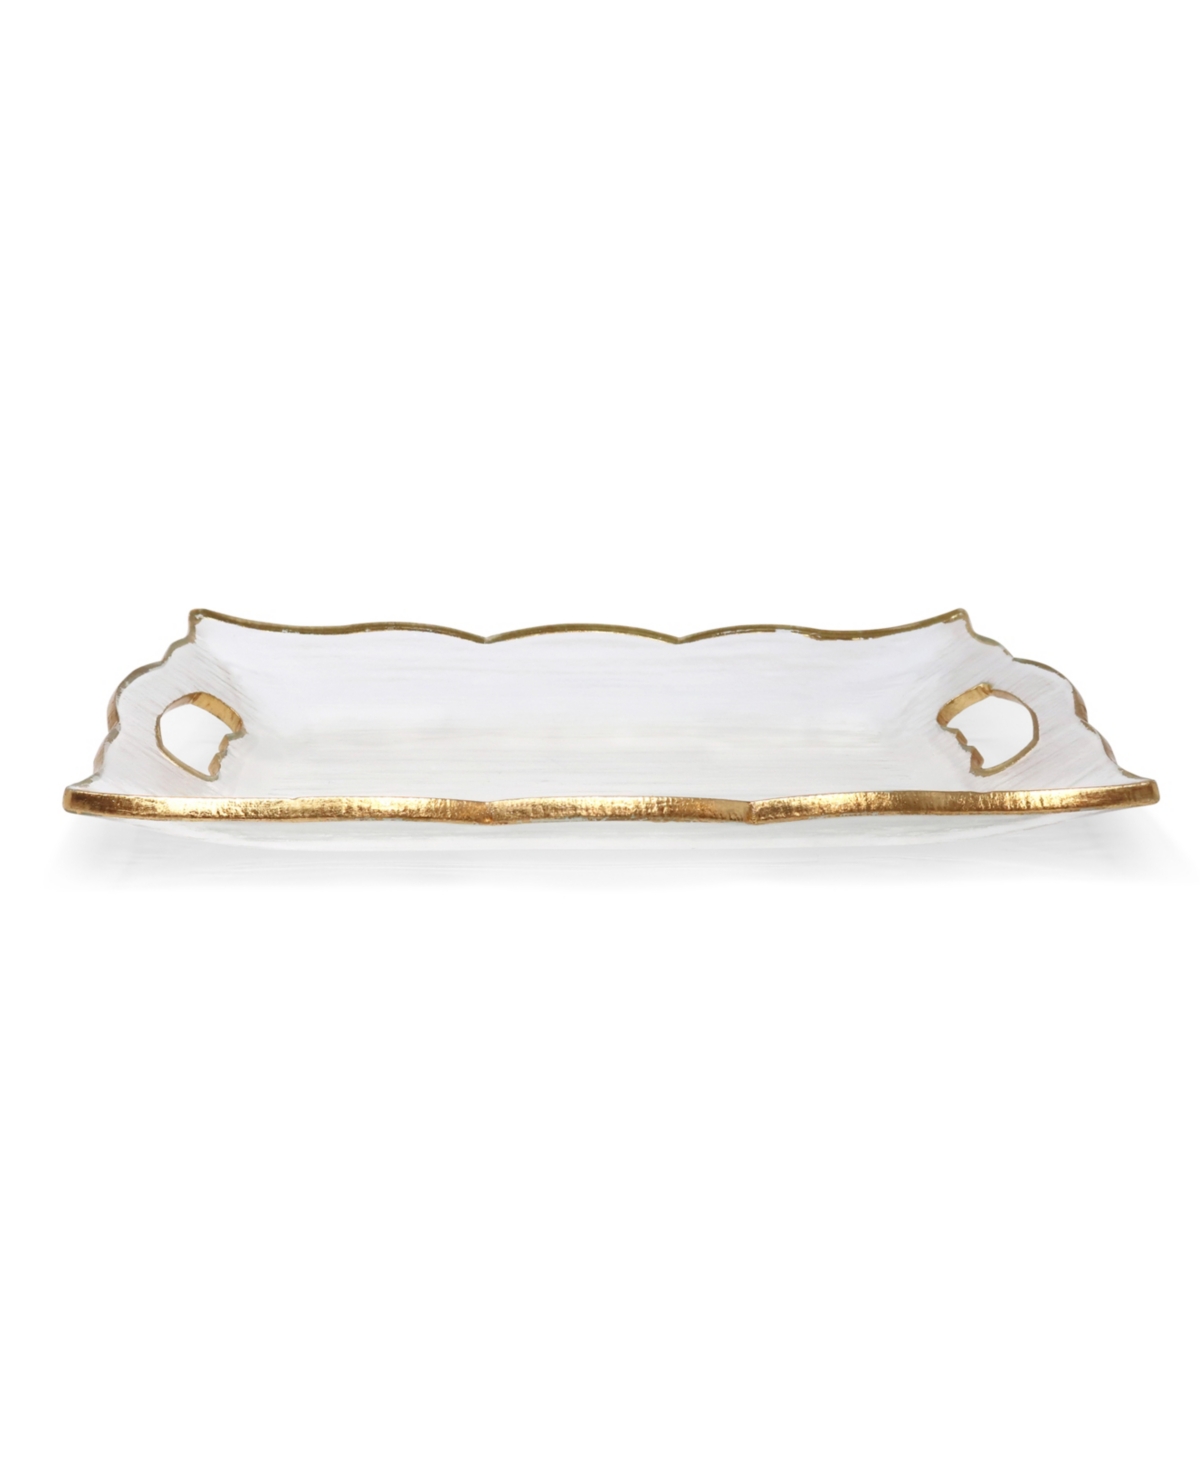 Rectangular Glass Tray with Handles and Gold-Tone Rim, 11.5" - Gold